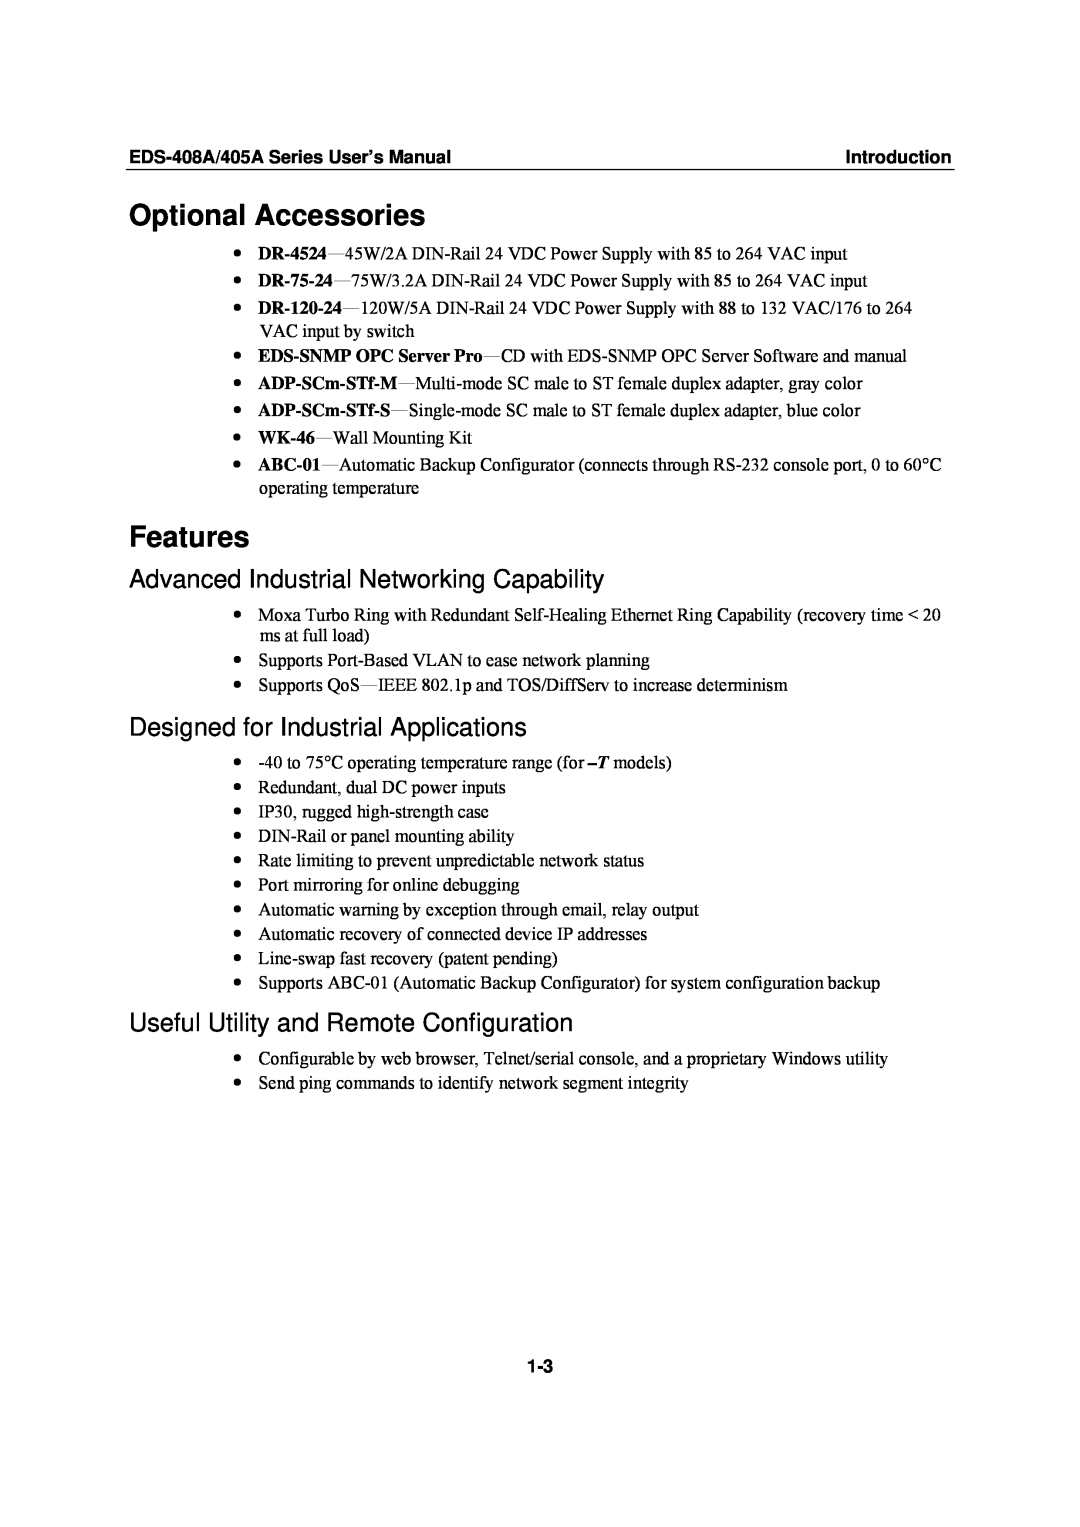 Moxa Technologies EDS-405A Optional Accessories, Features, Advanced Industrial Networking Capability, Introduction 